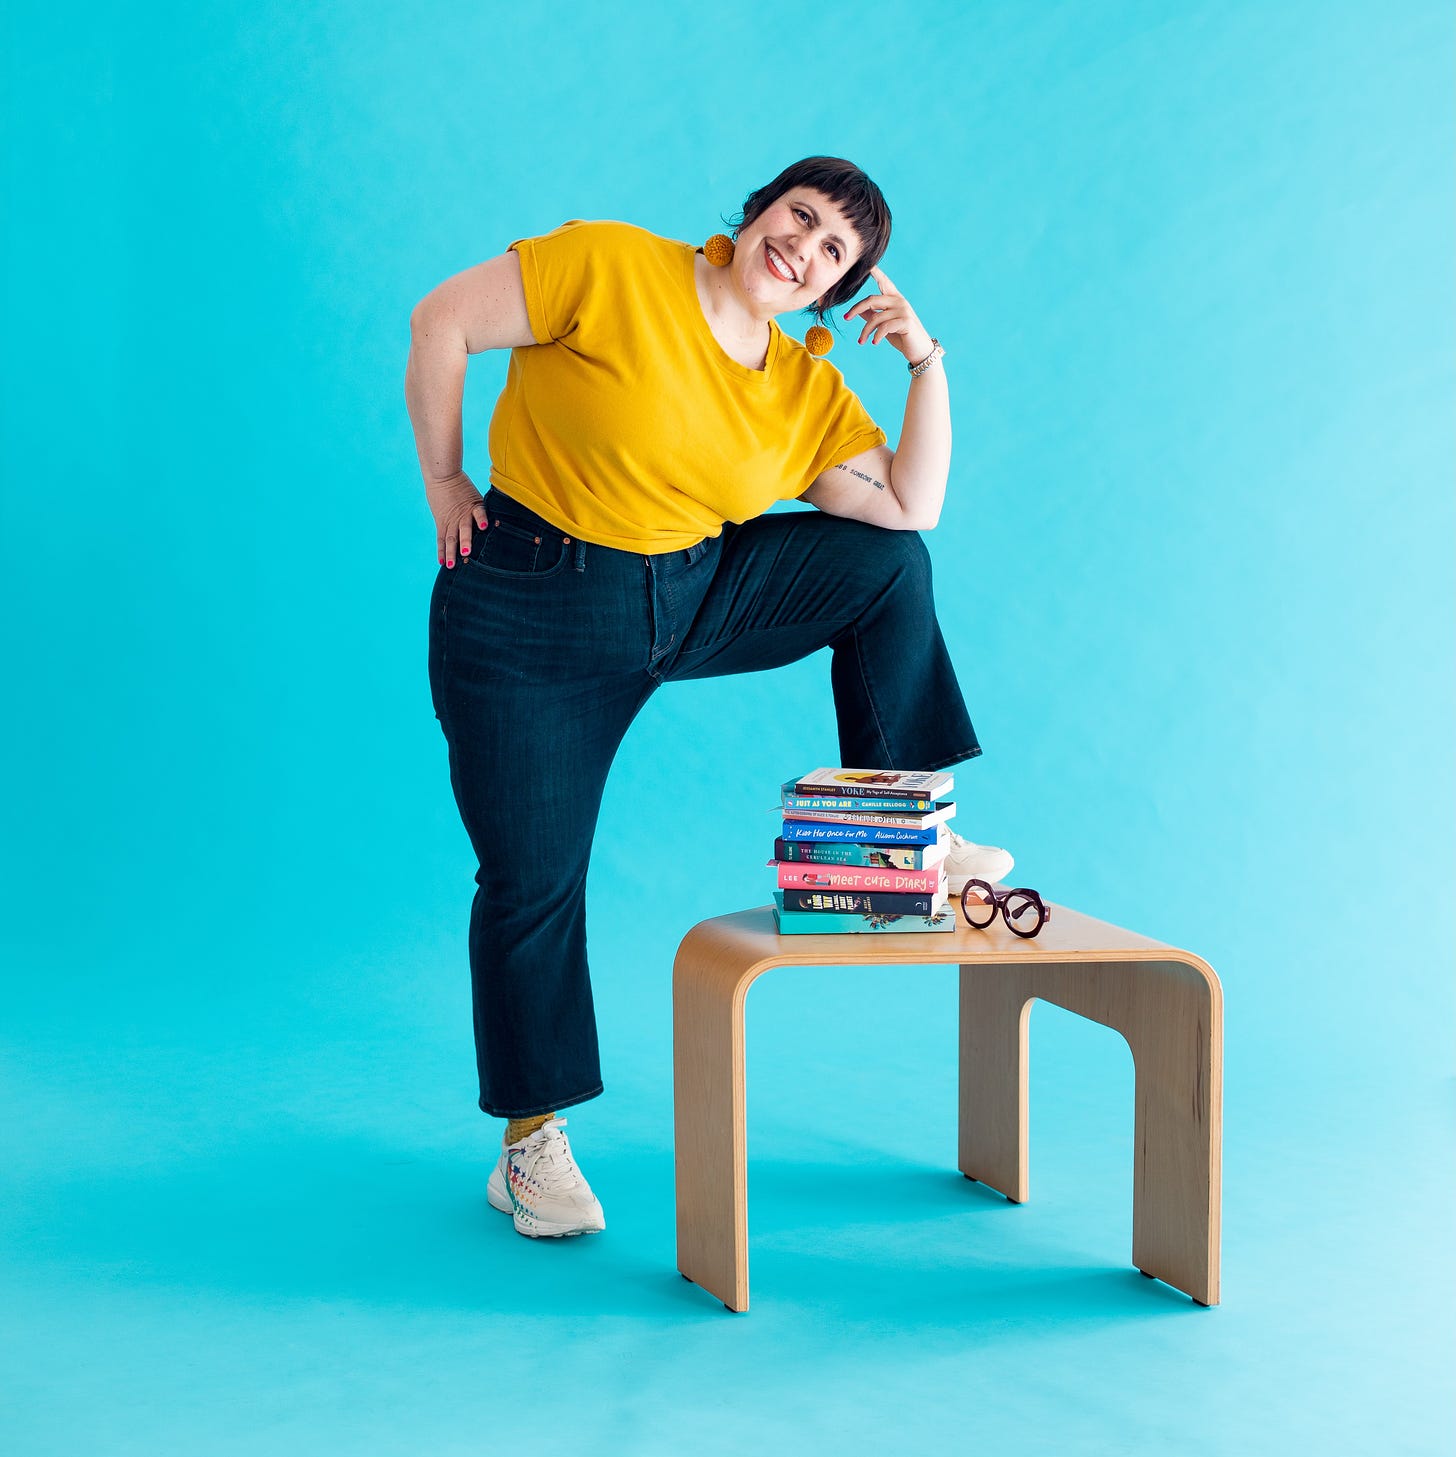 Lauren wearing a yellow shirt and jeans with her foot up on a table that has a pile of queer books on it and her big rimmed glasses